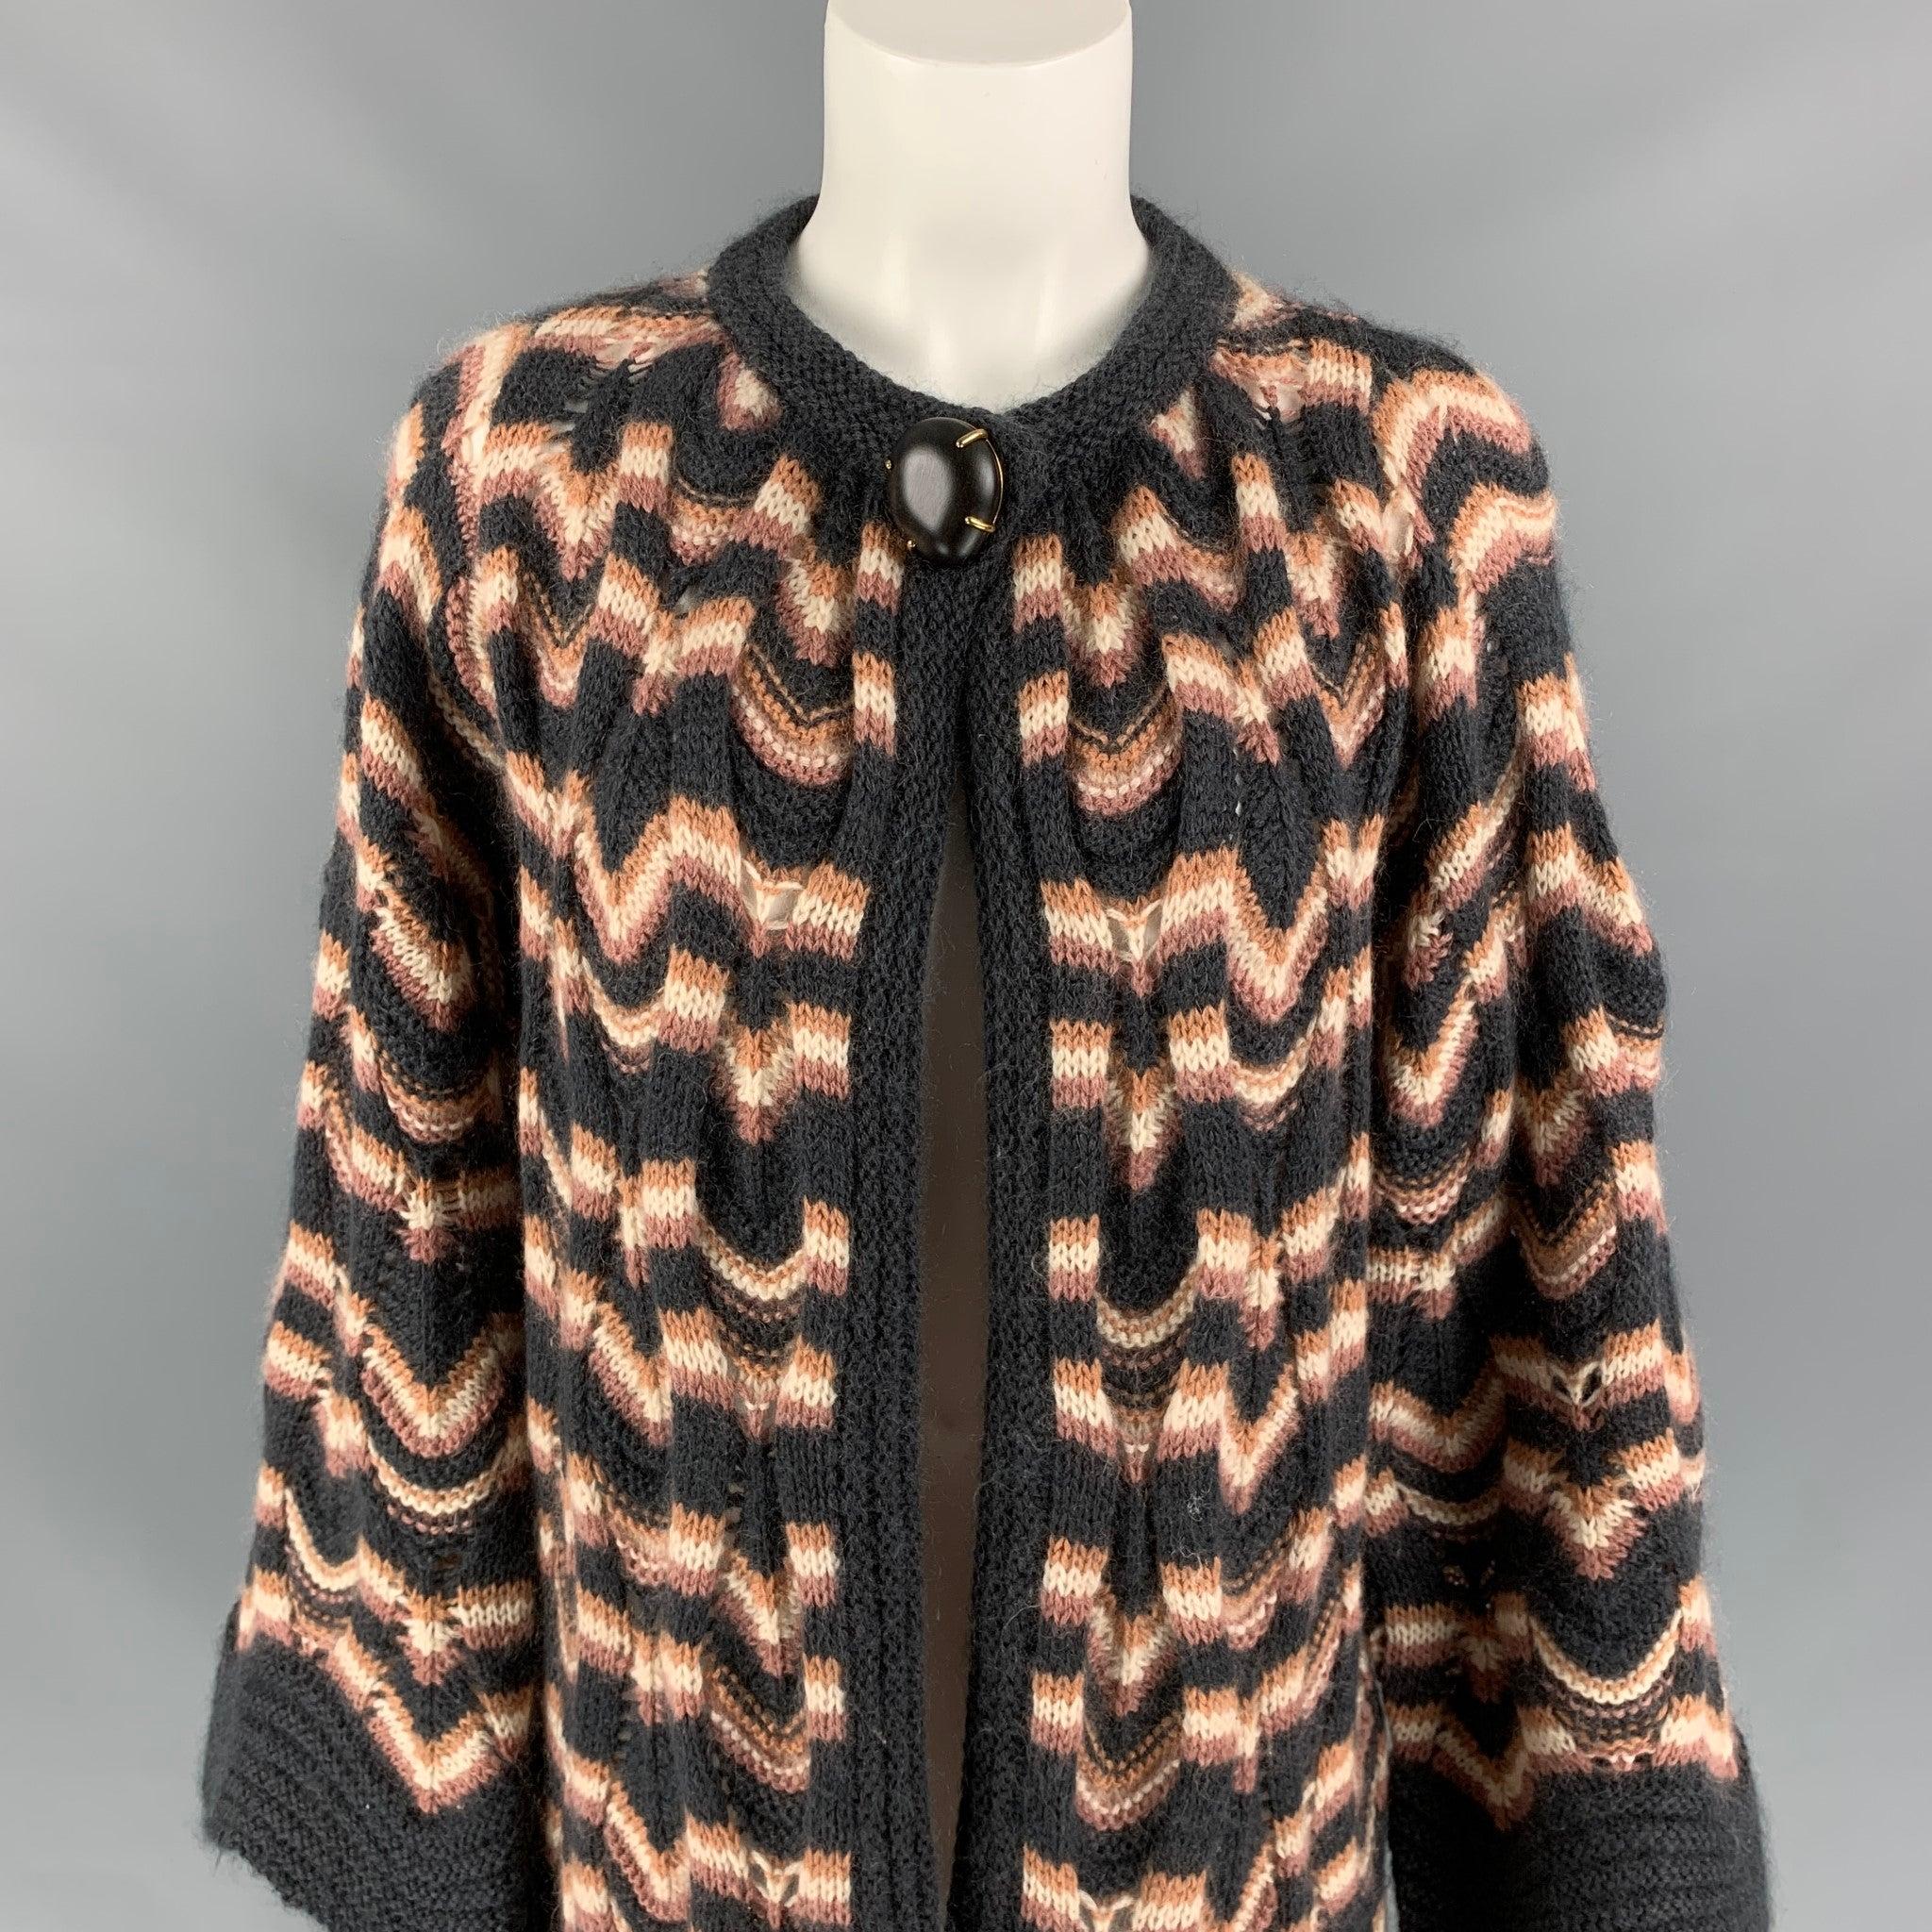 MISSONI coat comes in a dark gray & rose knitted wool / mohair featuring wide arm, large button detail, and a open front. Made in Italy.
Very Good
Pre-Owned Condition. 

Marked:  42 

Measurements: 
 
Shoulder: 16.5 inches Bust: 38 inches Sleeve: 27